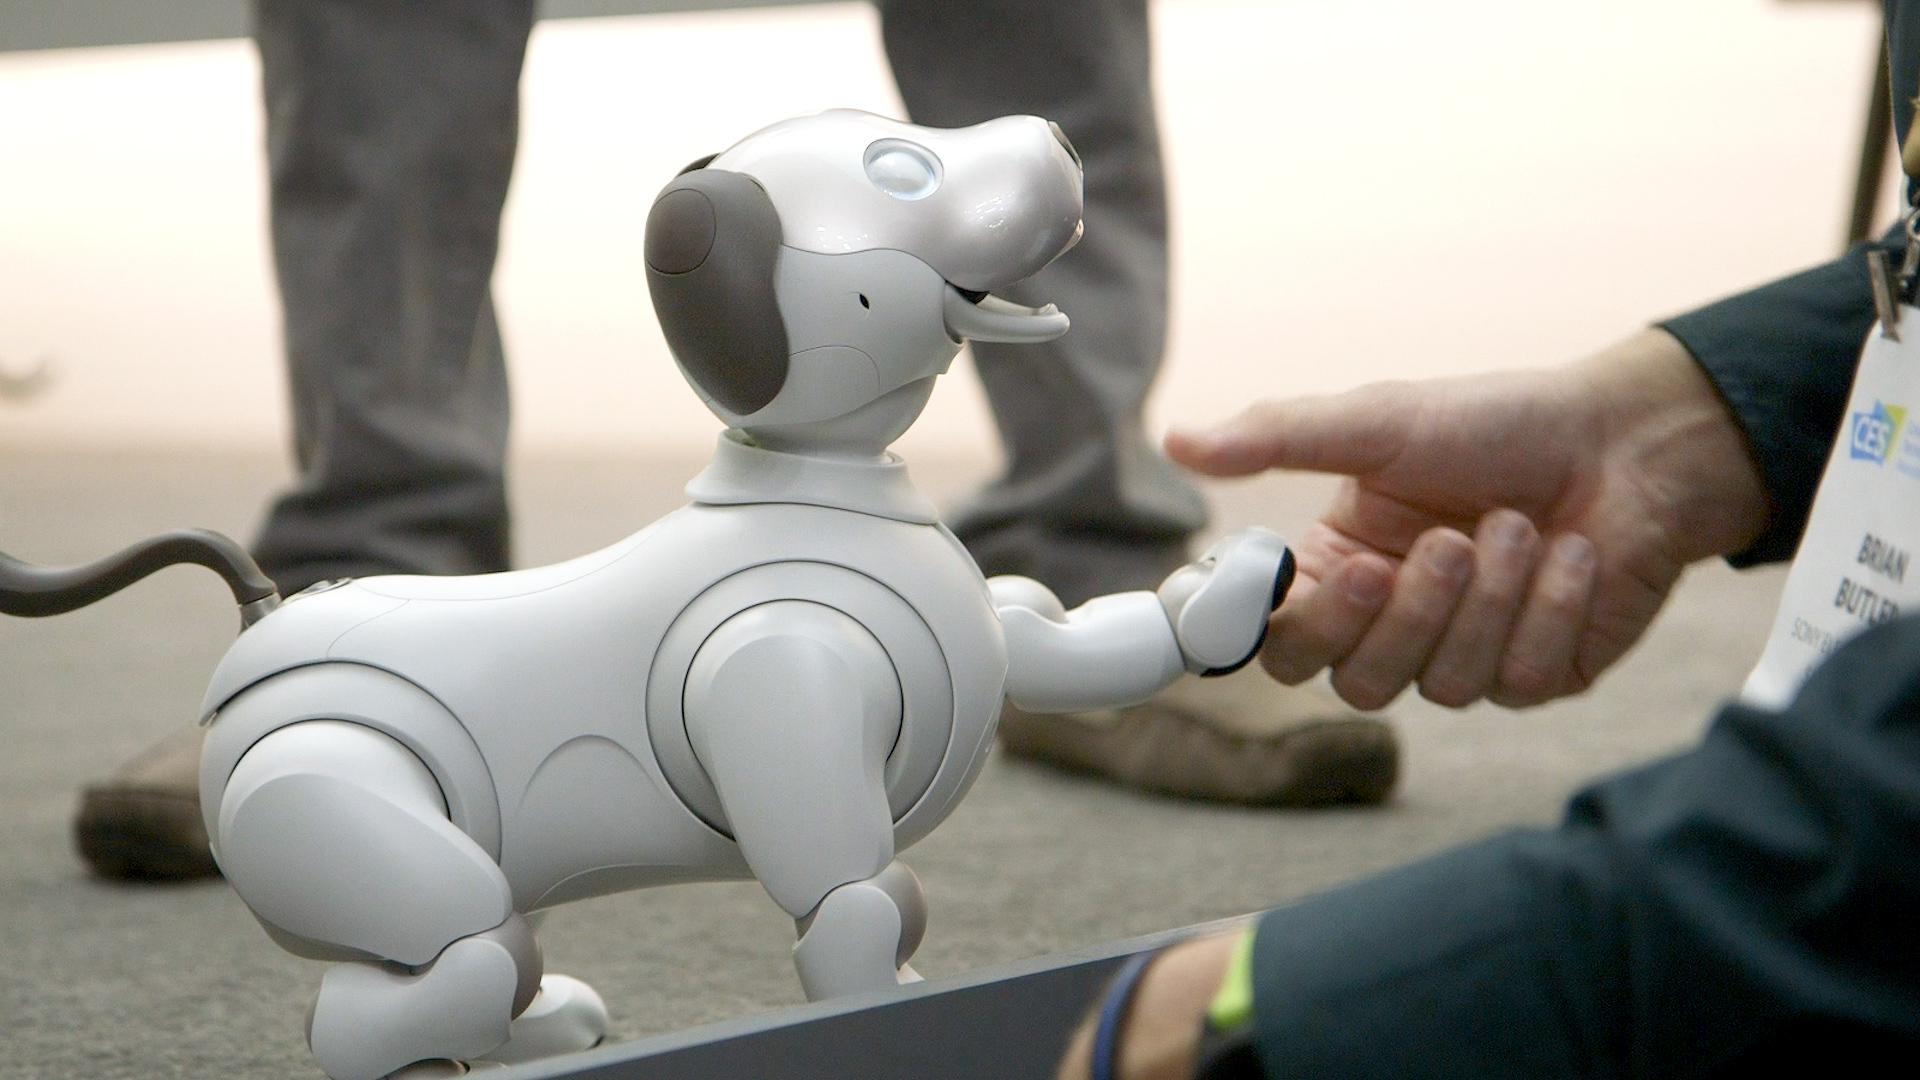 Sony's new Aibo is a very good robot dog